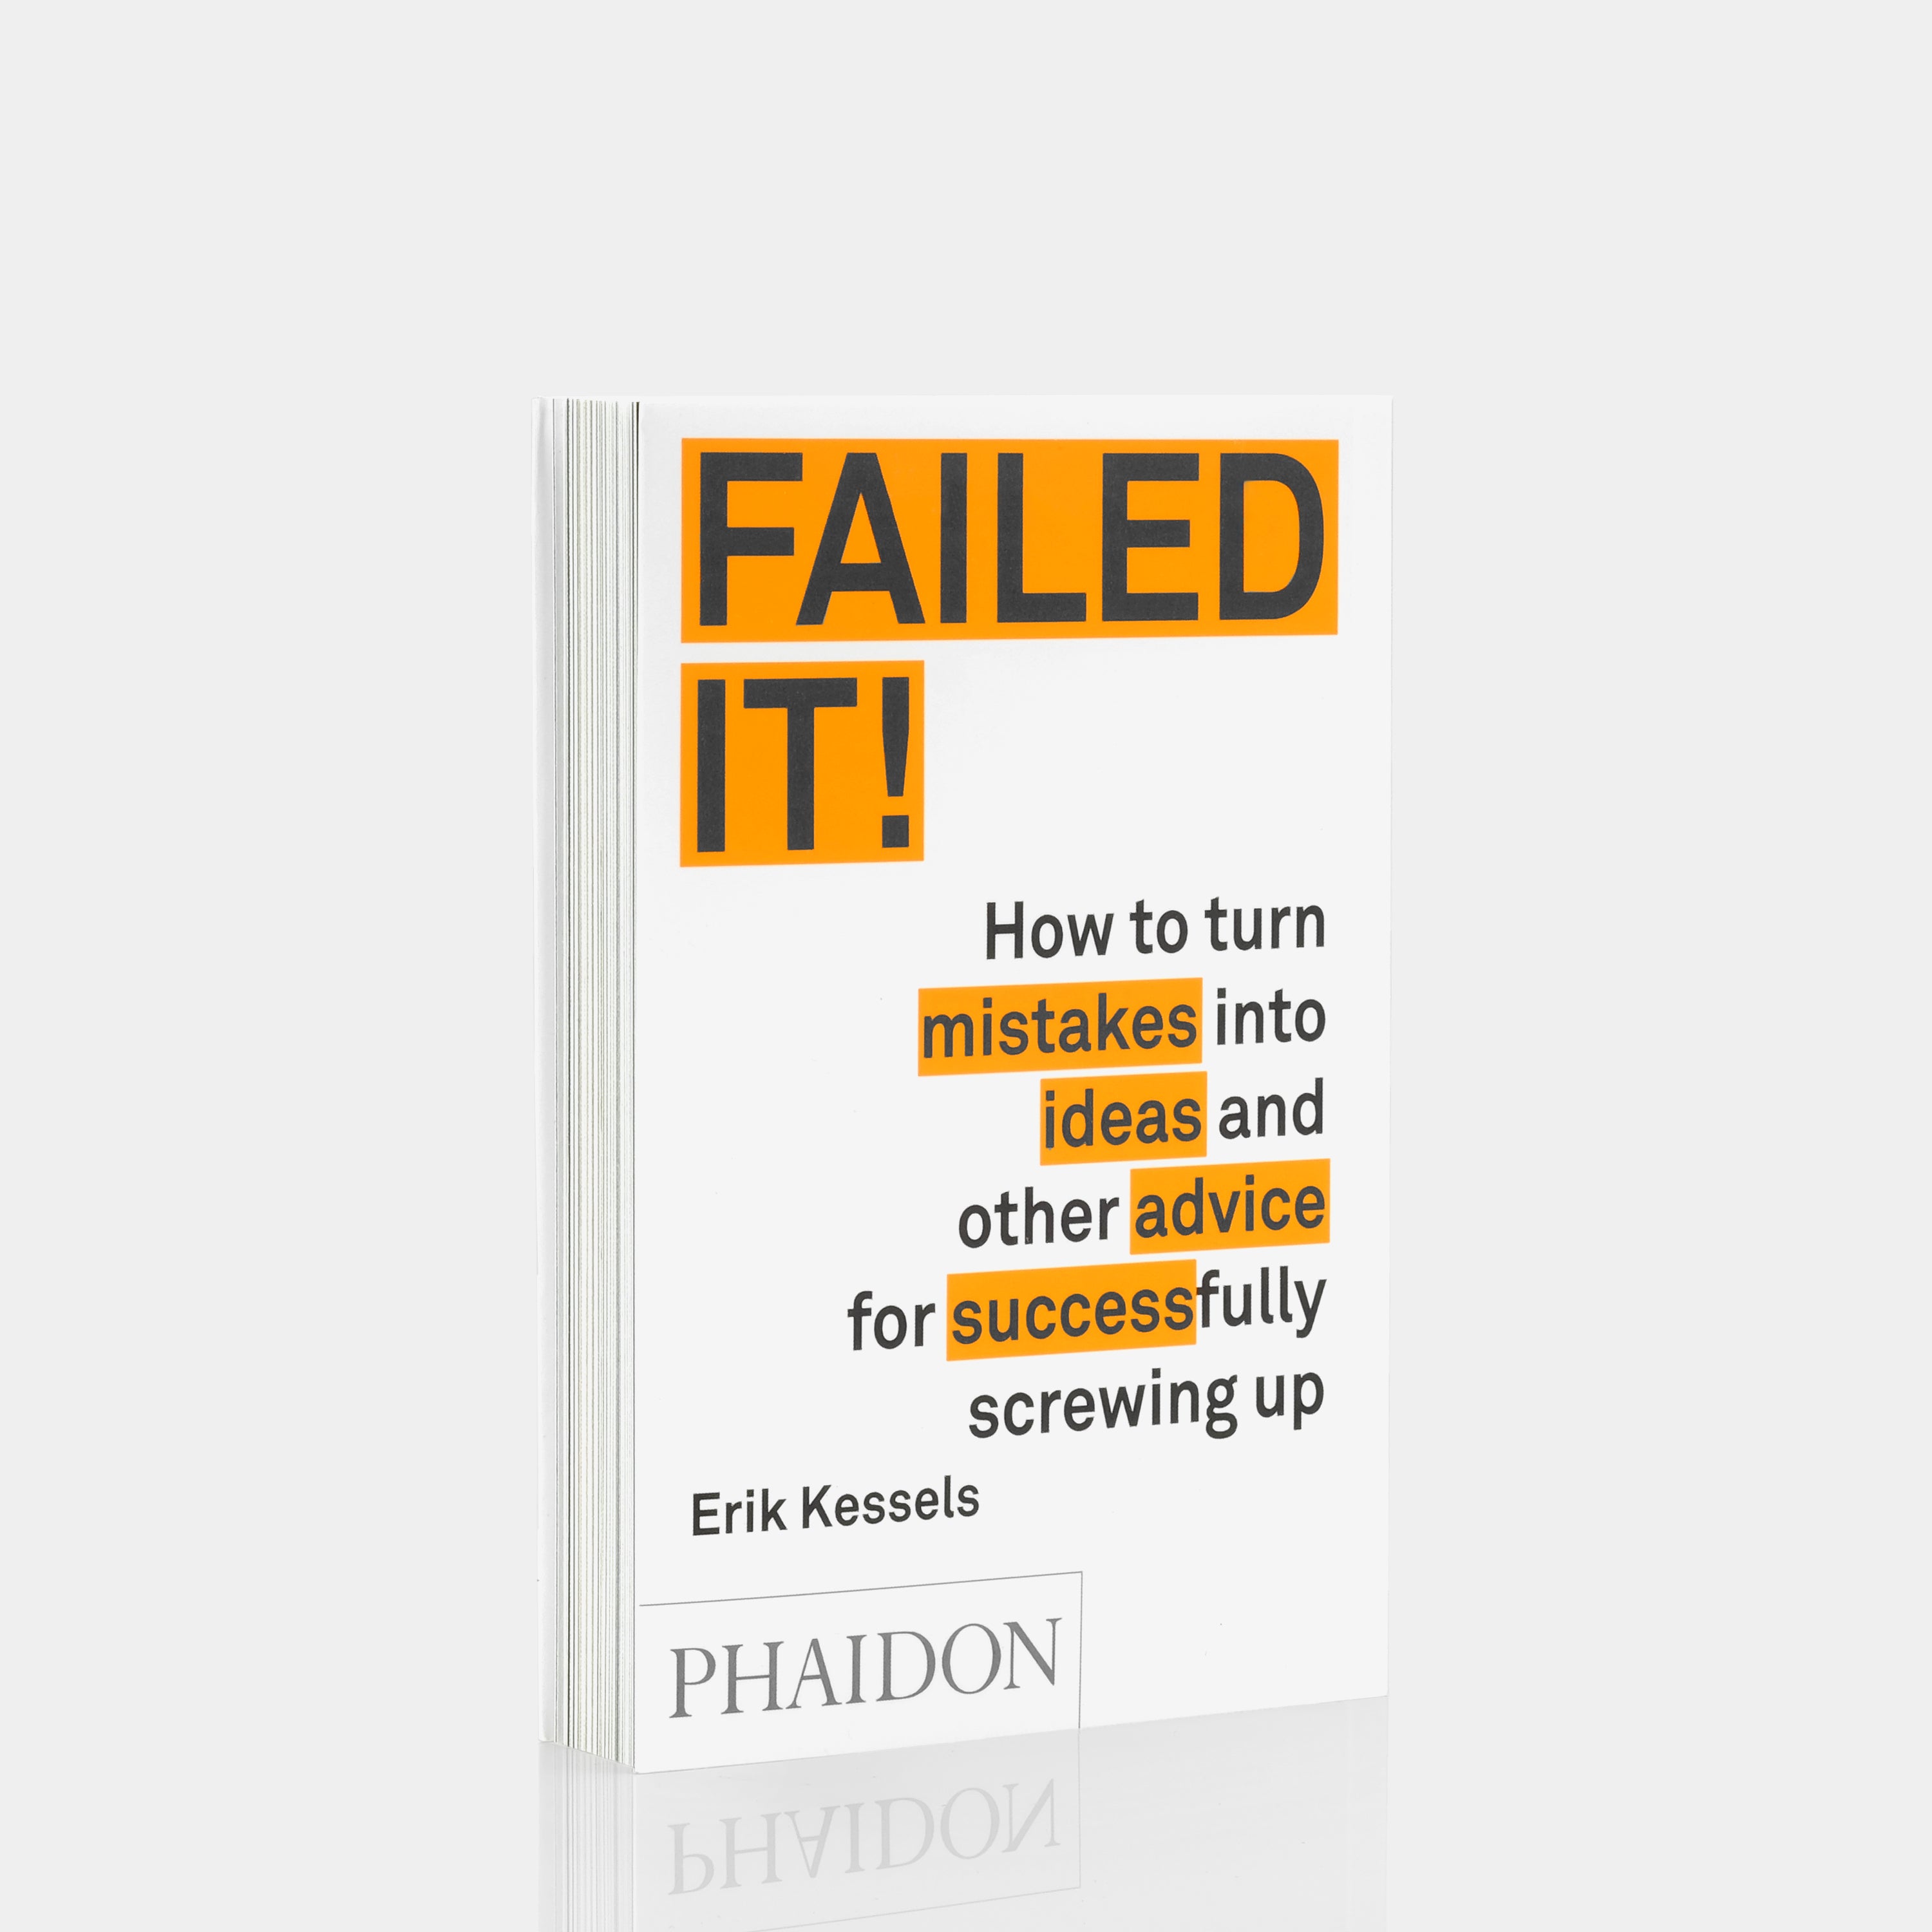 Failed It! How to Turn Mistakes Into Ideas and Other Advice for Successfully Screwing Up by Erik Kessels Phaidon Book